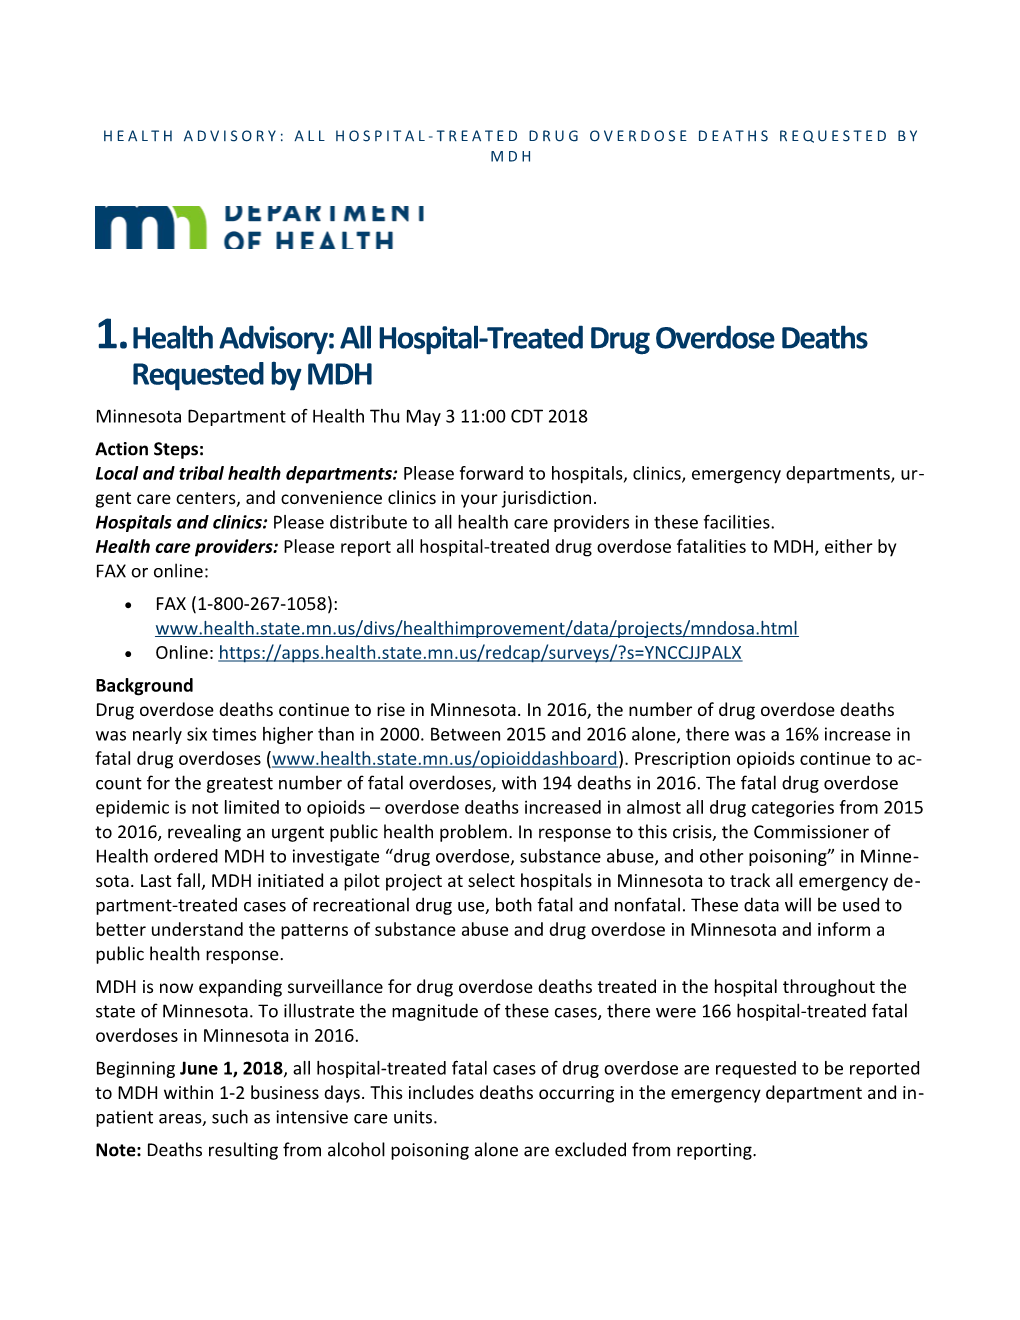 Health Advisory: All Hospital-Treated Drug Overdose Deaths Requested by MDH